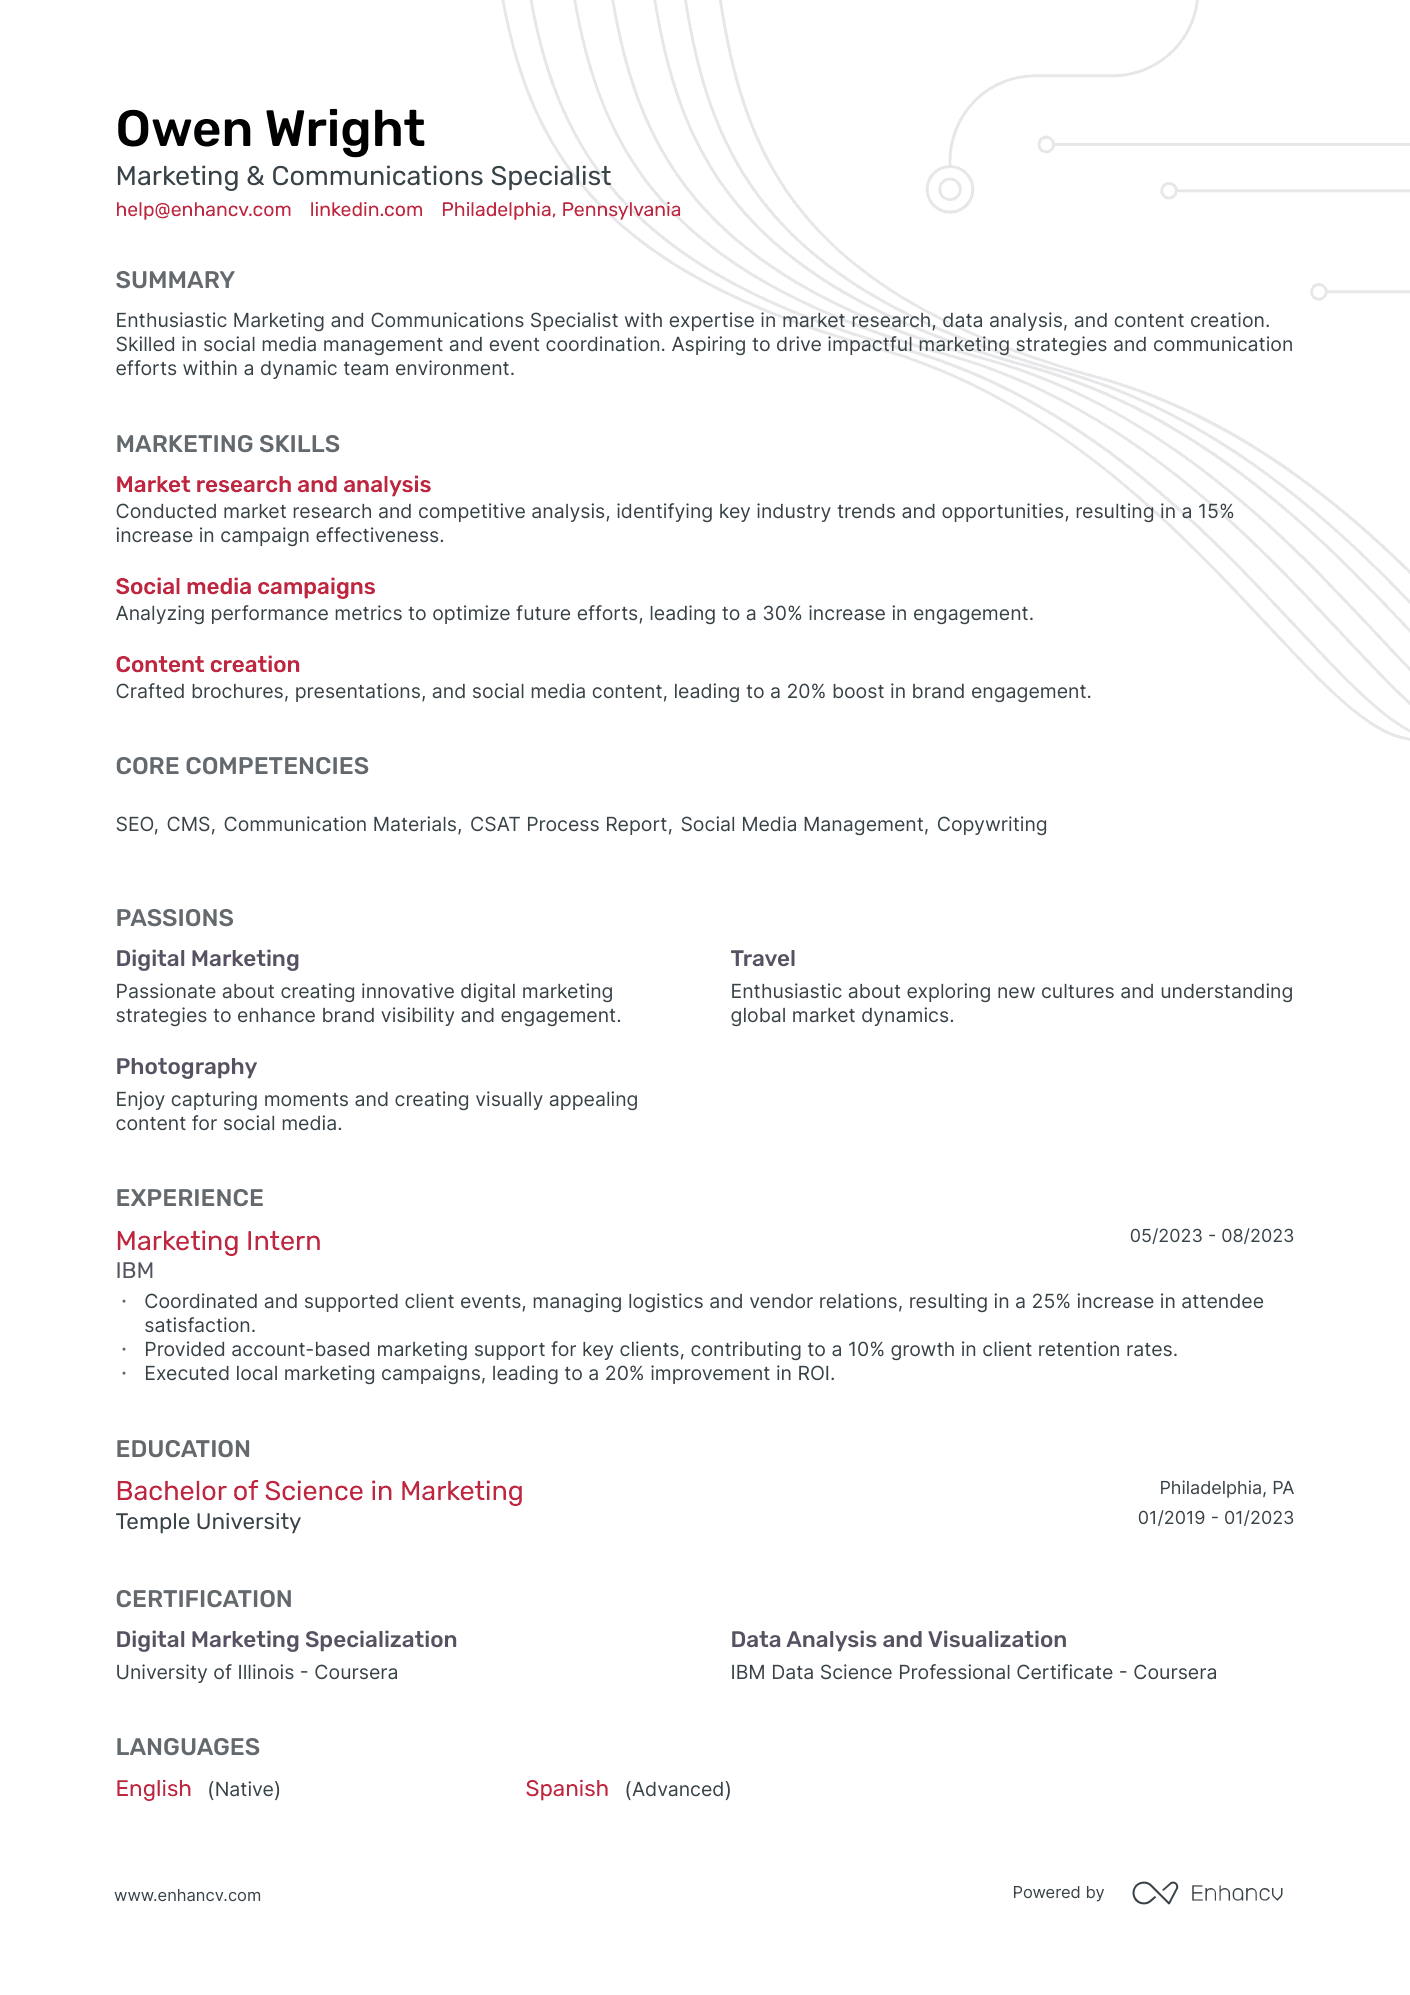 Marketing & Communications Specialist  resume example